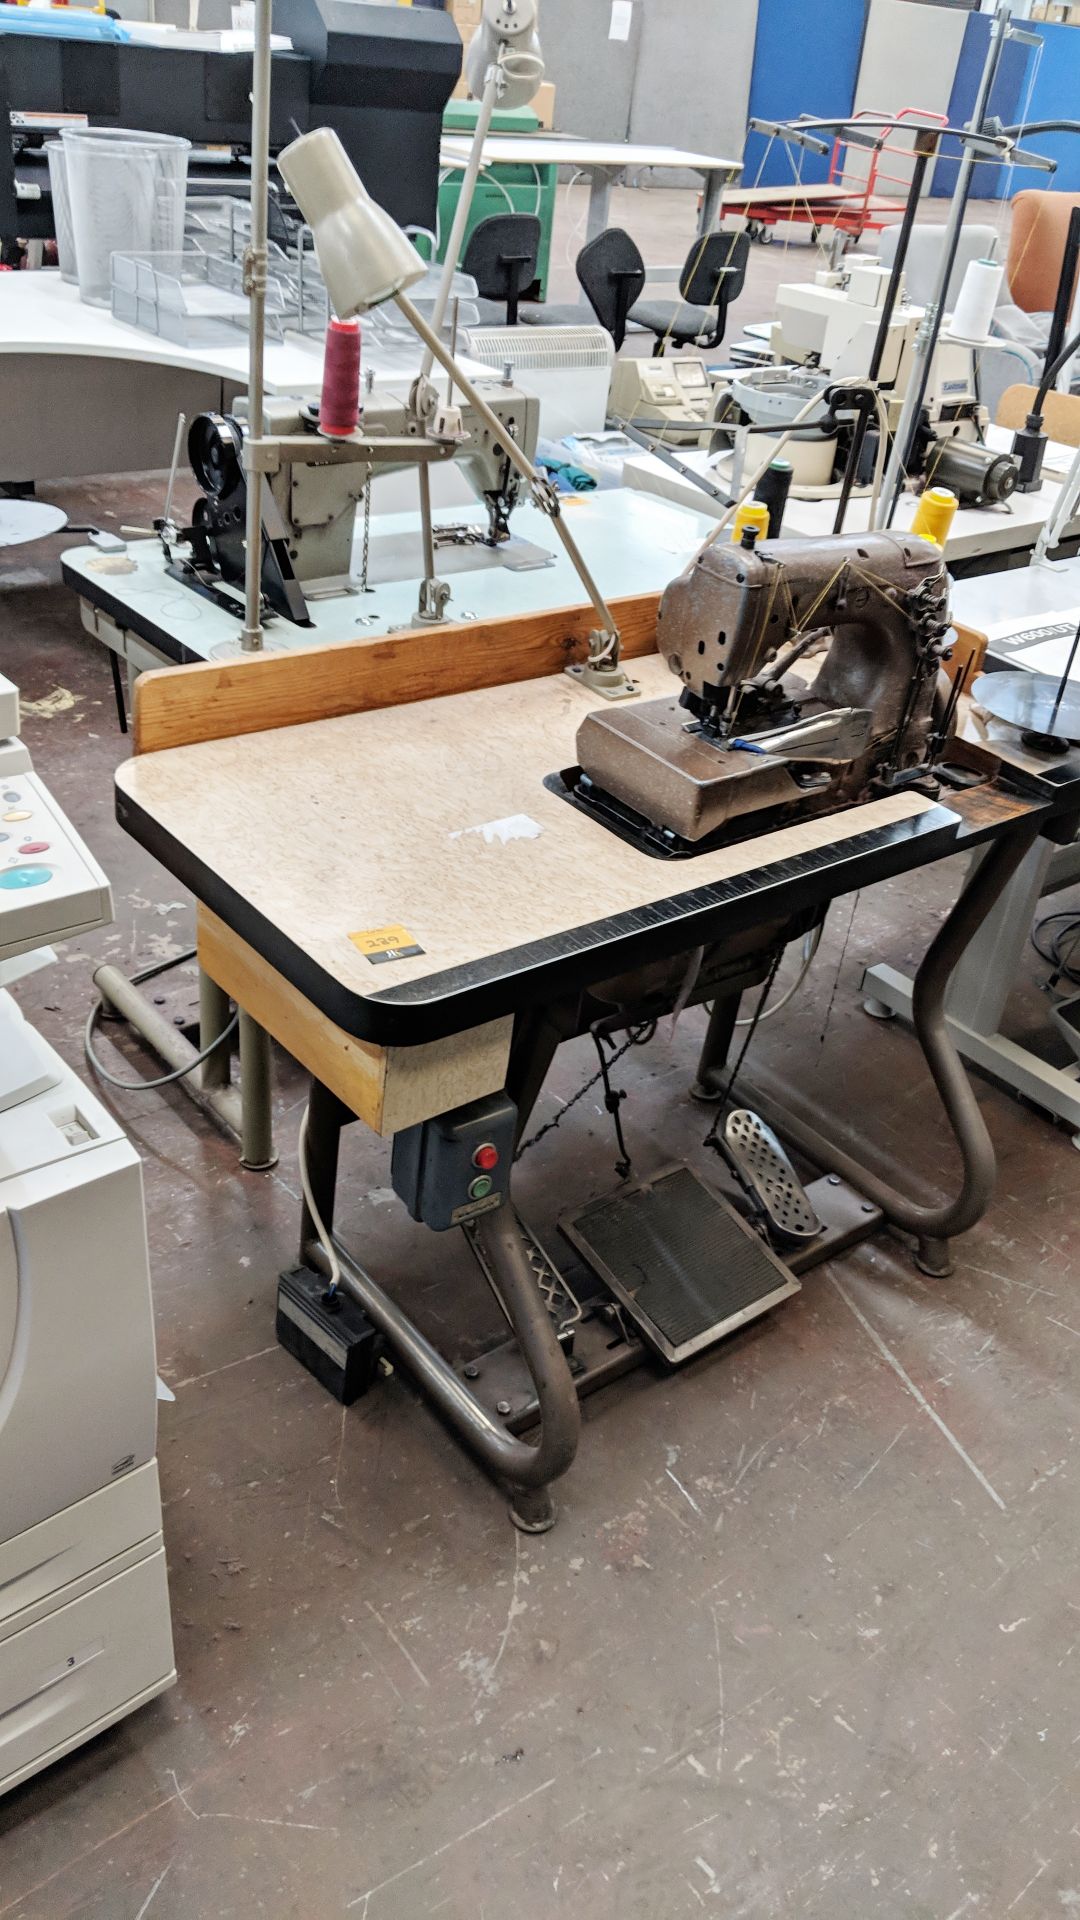 Union Special overlocker sewing machine on bench with tape feed attachments, including foot & hand